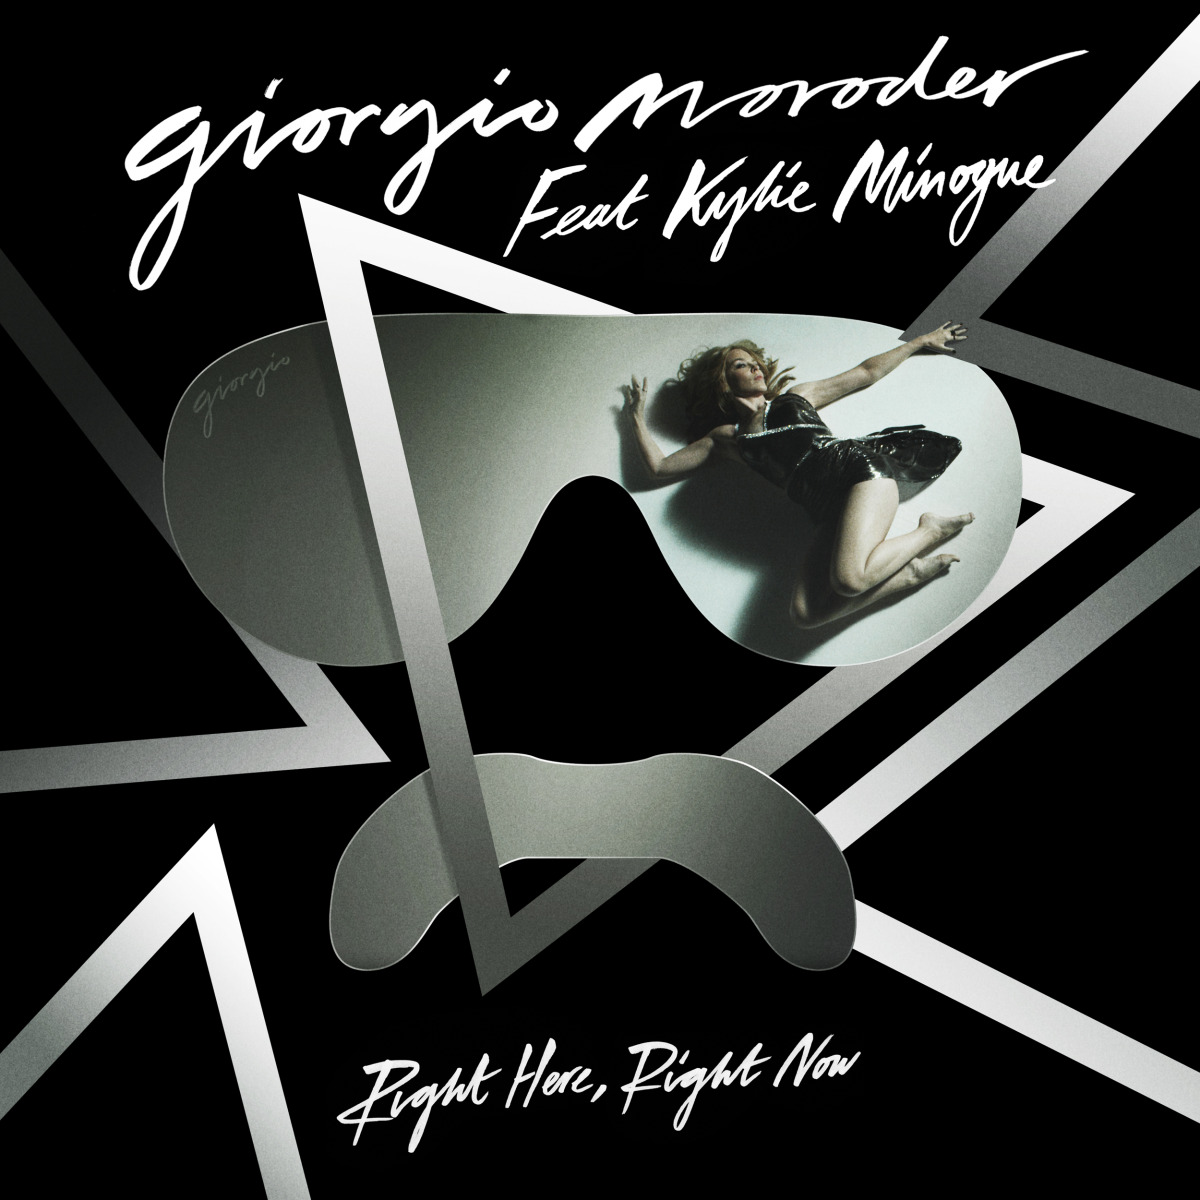 Music / Giorgio Moroder / Right Here, Right Now / Single Cover&lt;span class=&quot;slide_numbers&quot;&gt;&lt;span class=&quot;slide_number&quot;&gt;4&lt;/span&gt;/5&lt;/span&gt;